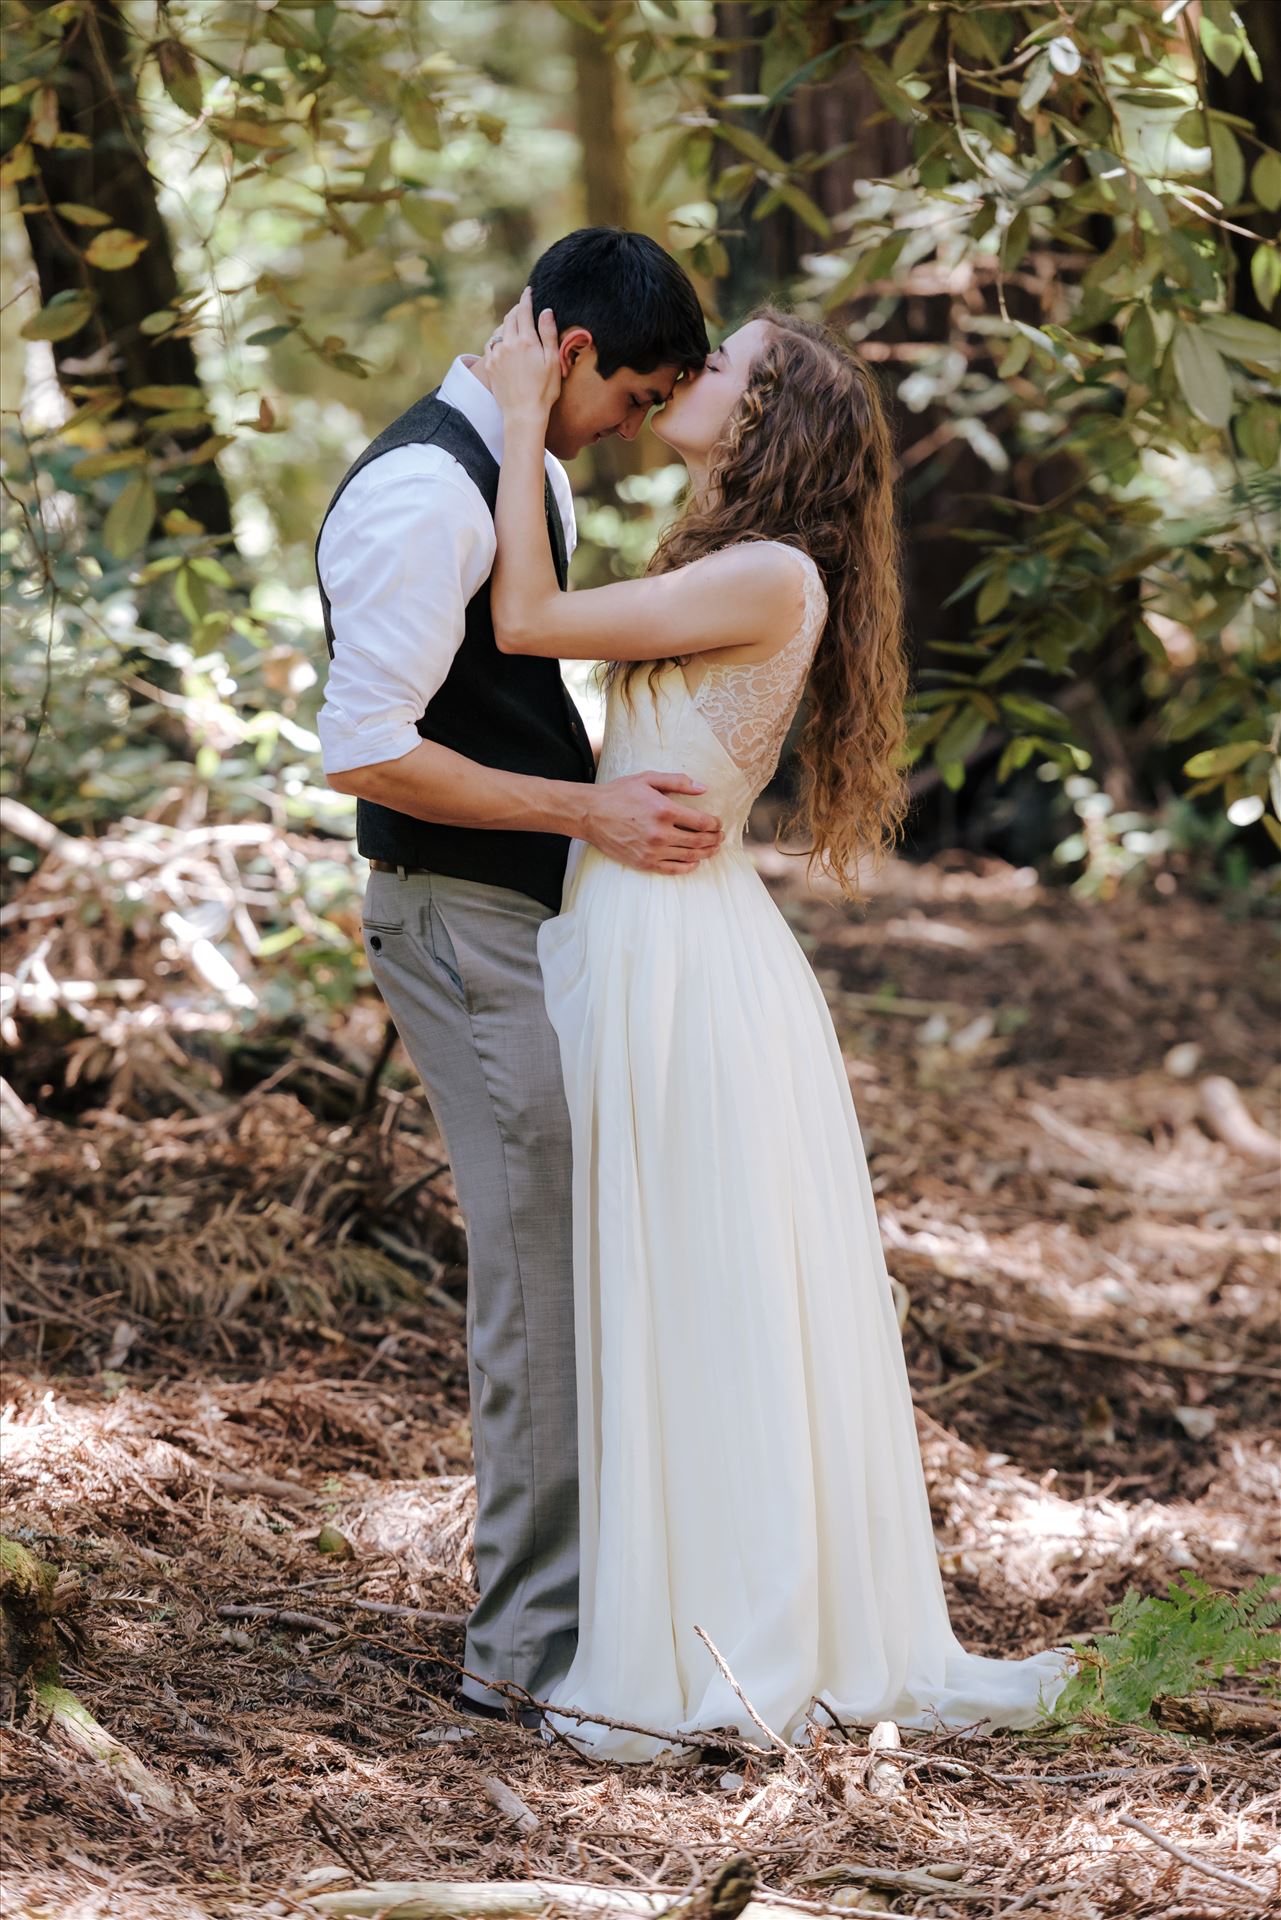 FW-6044.JPGMt Madonna wedding in the redwoods outside of Watsonville, California with a romantic and classic vibe by sarah williams of mirror's edge photography a san luis obispo wedding photographer.  Bride kisses groom in the trees